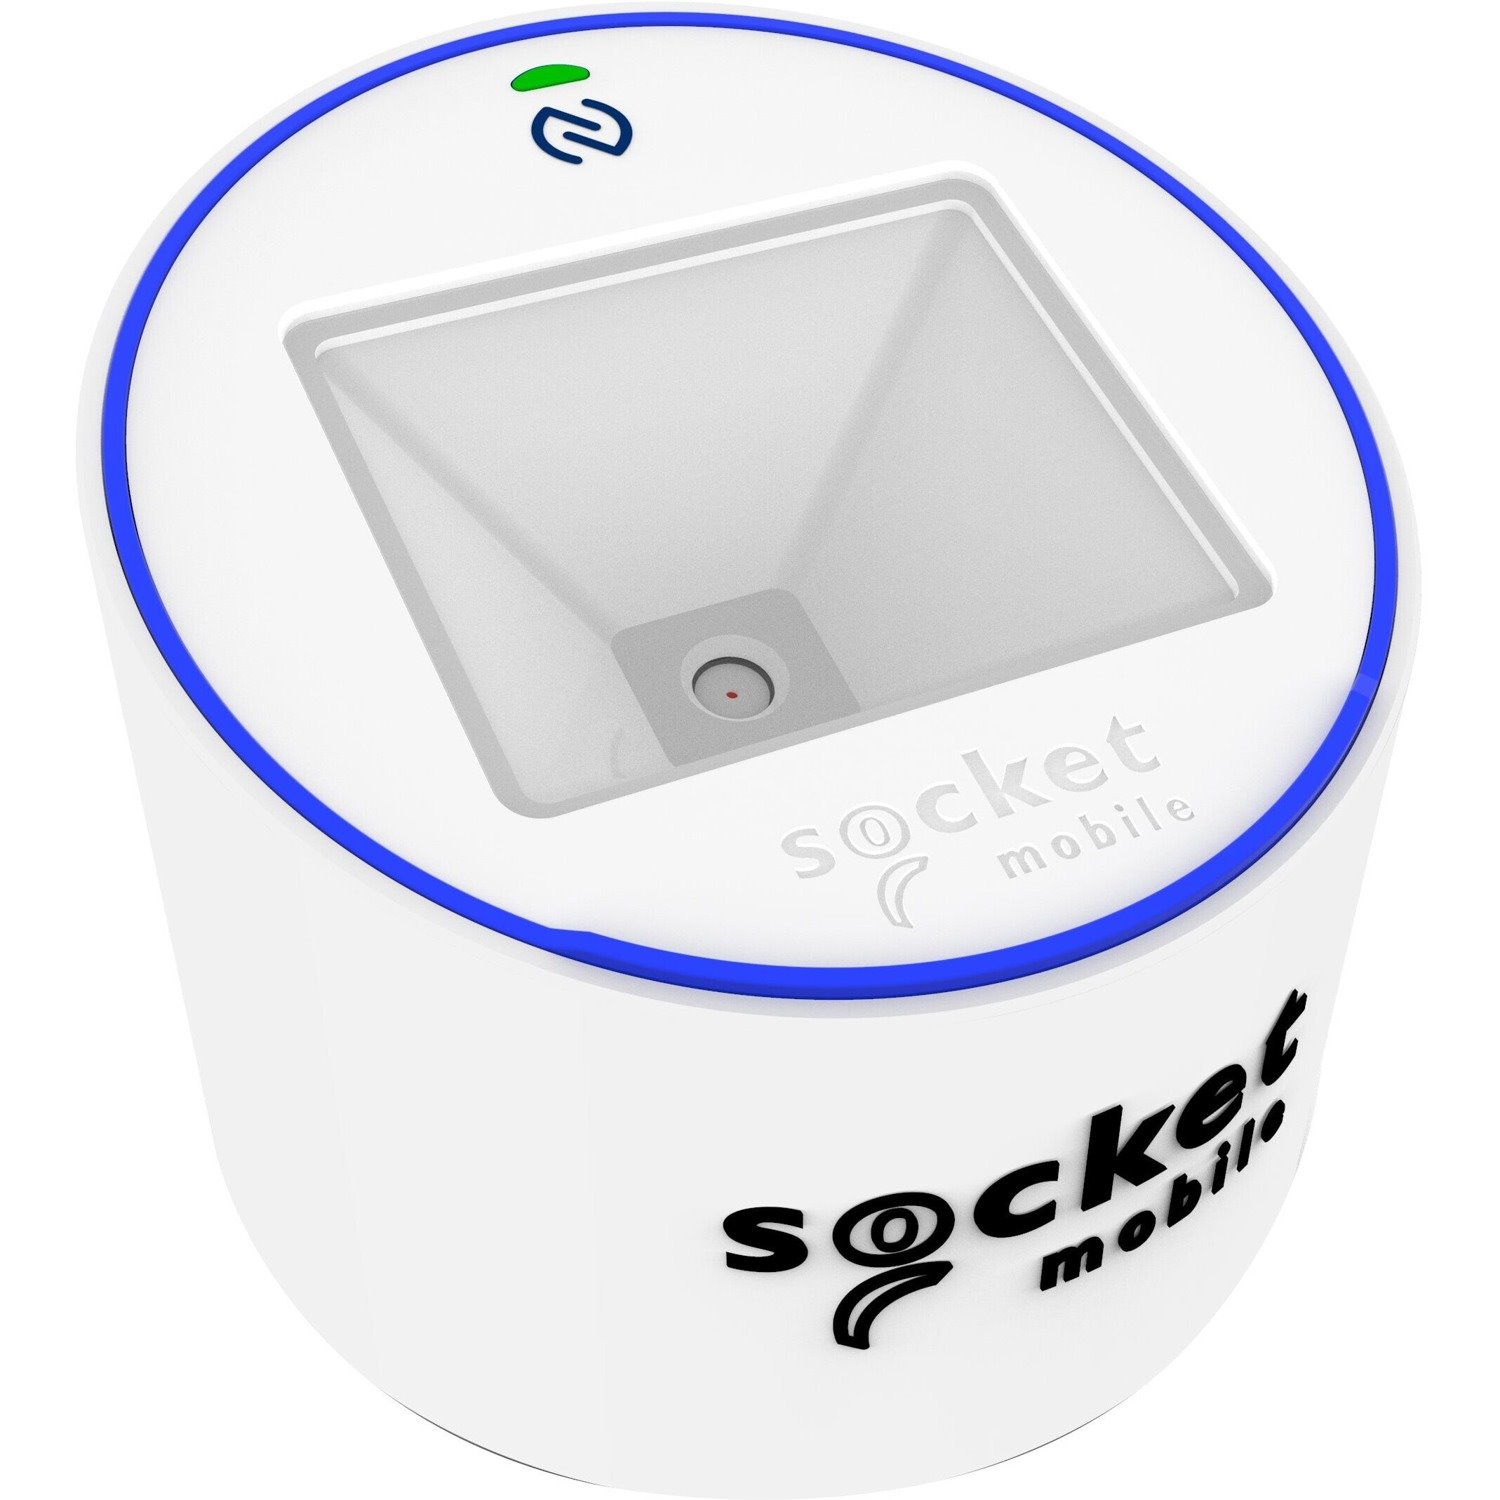 Socket Mobile SocketScan S370 Retail, Hospitality, Quick Service Restaurant (QSR), Transportation Barcode Scanner - Wireless Connectivity - White - USB Cable Included